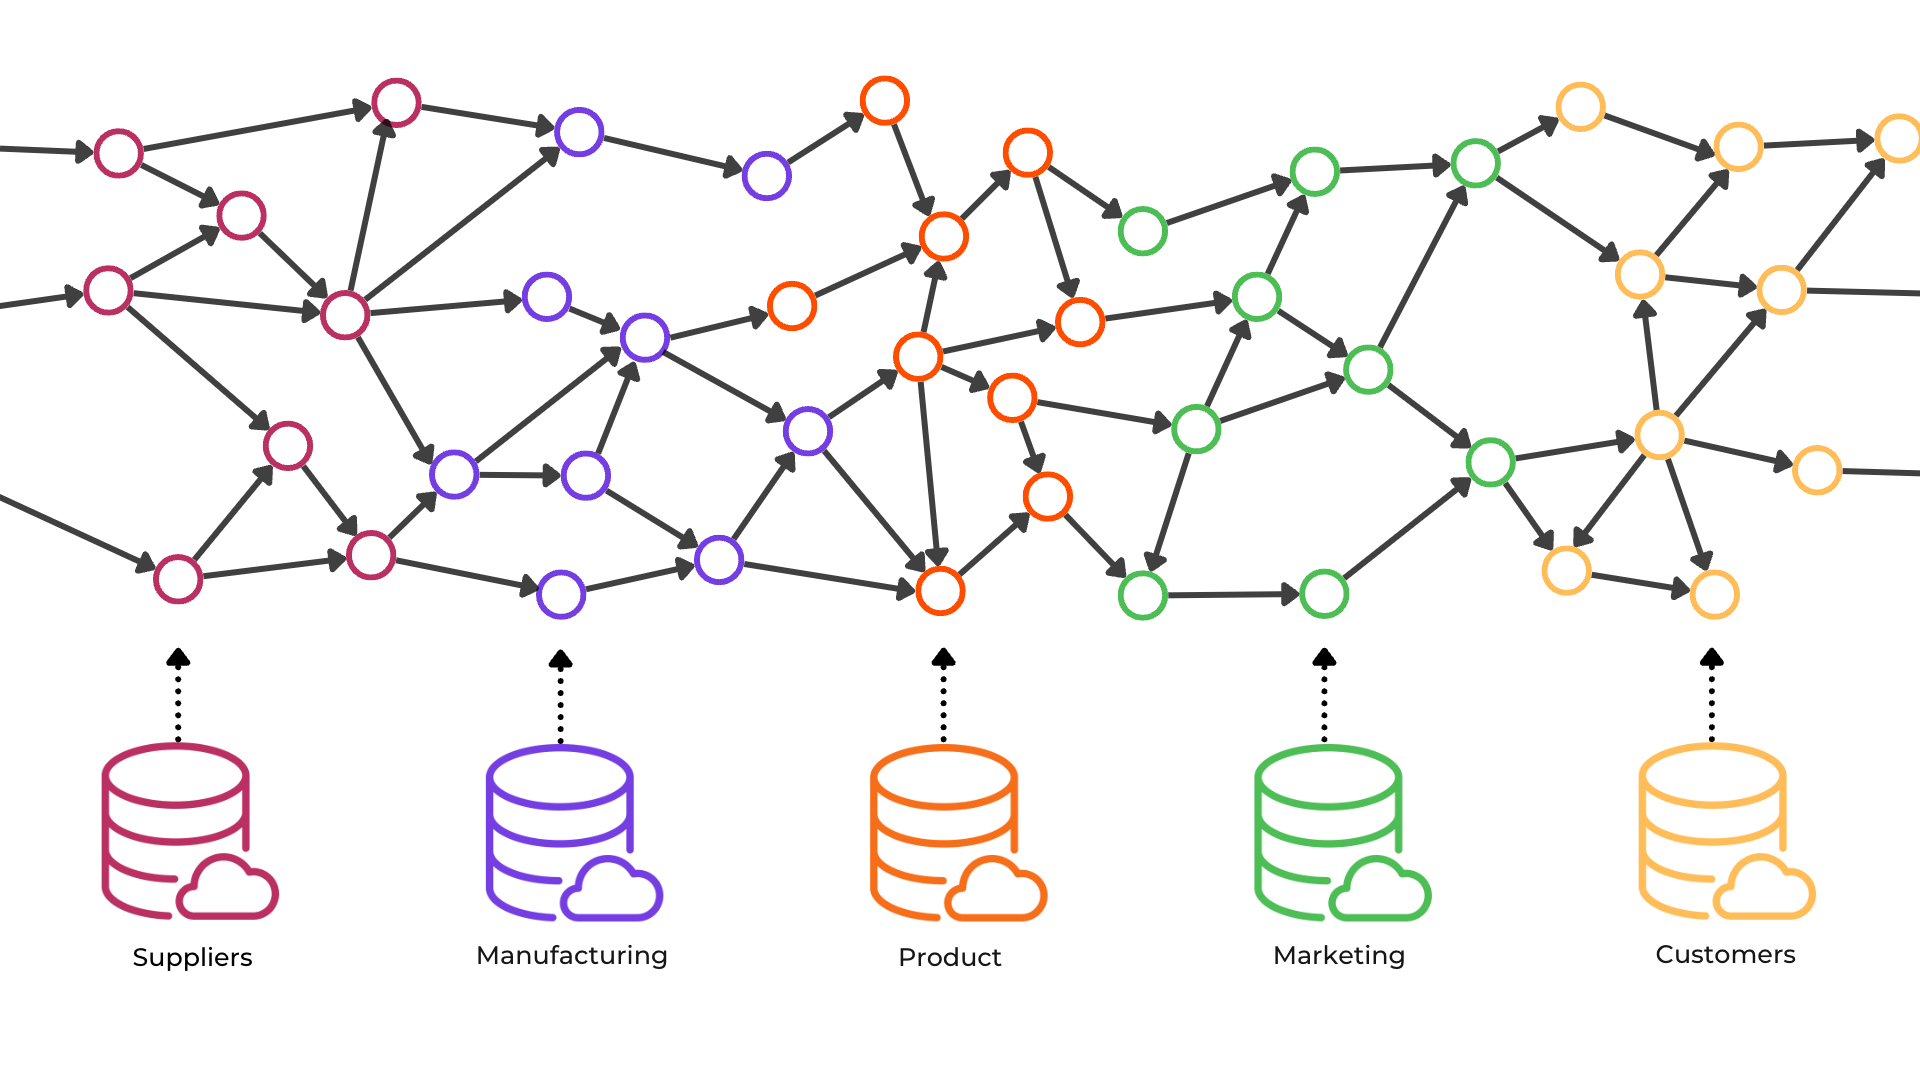 Data silos connected by arrows.